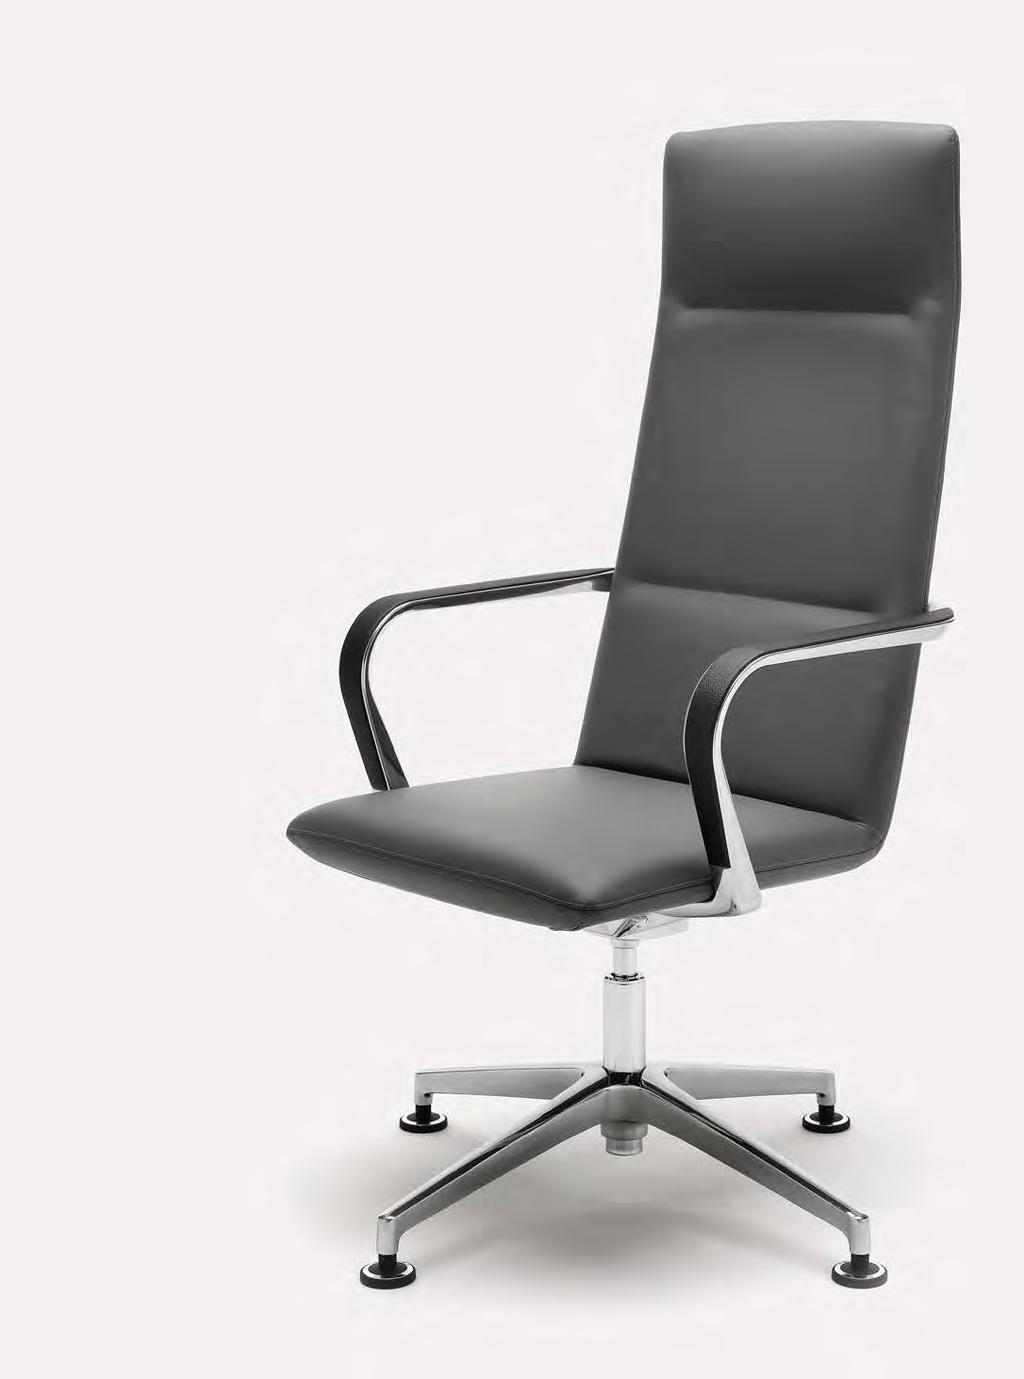 fresh alternative to the established norms of executive seating.